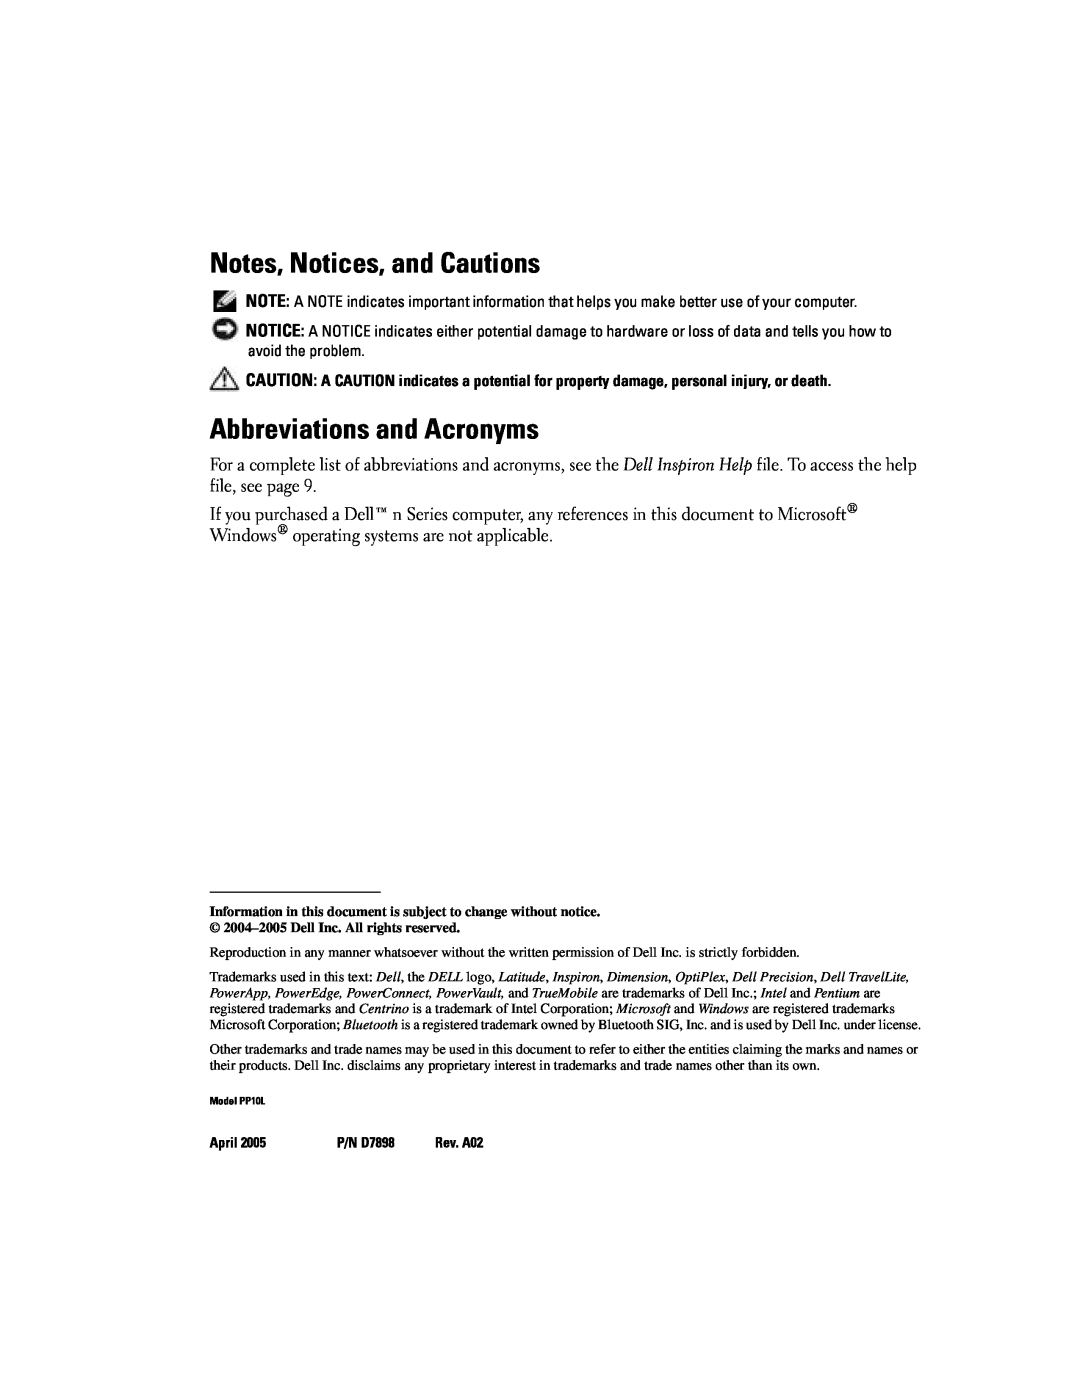 Dell PP10L owner manual Notes, Notices, and Cautions, Abbreviations and Acronyms, April, P/N D7898 